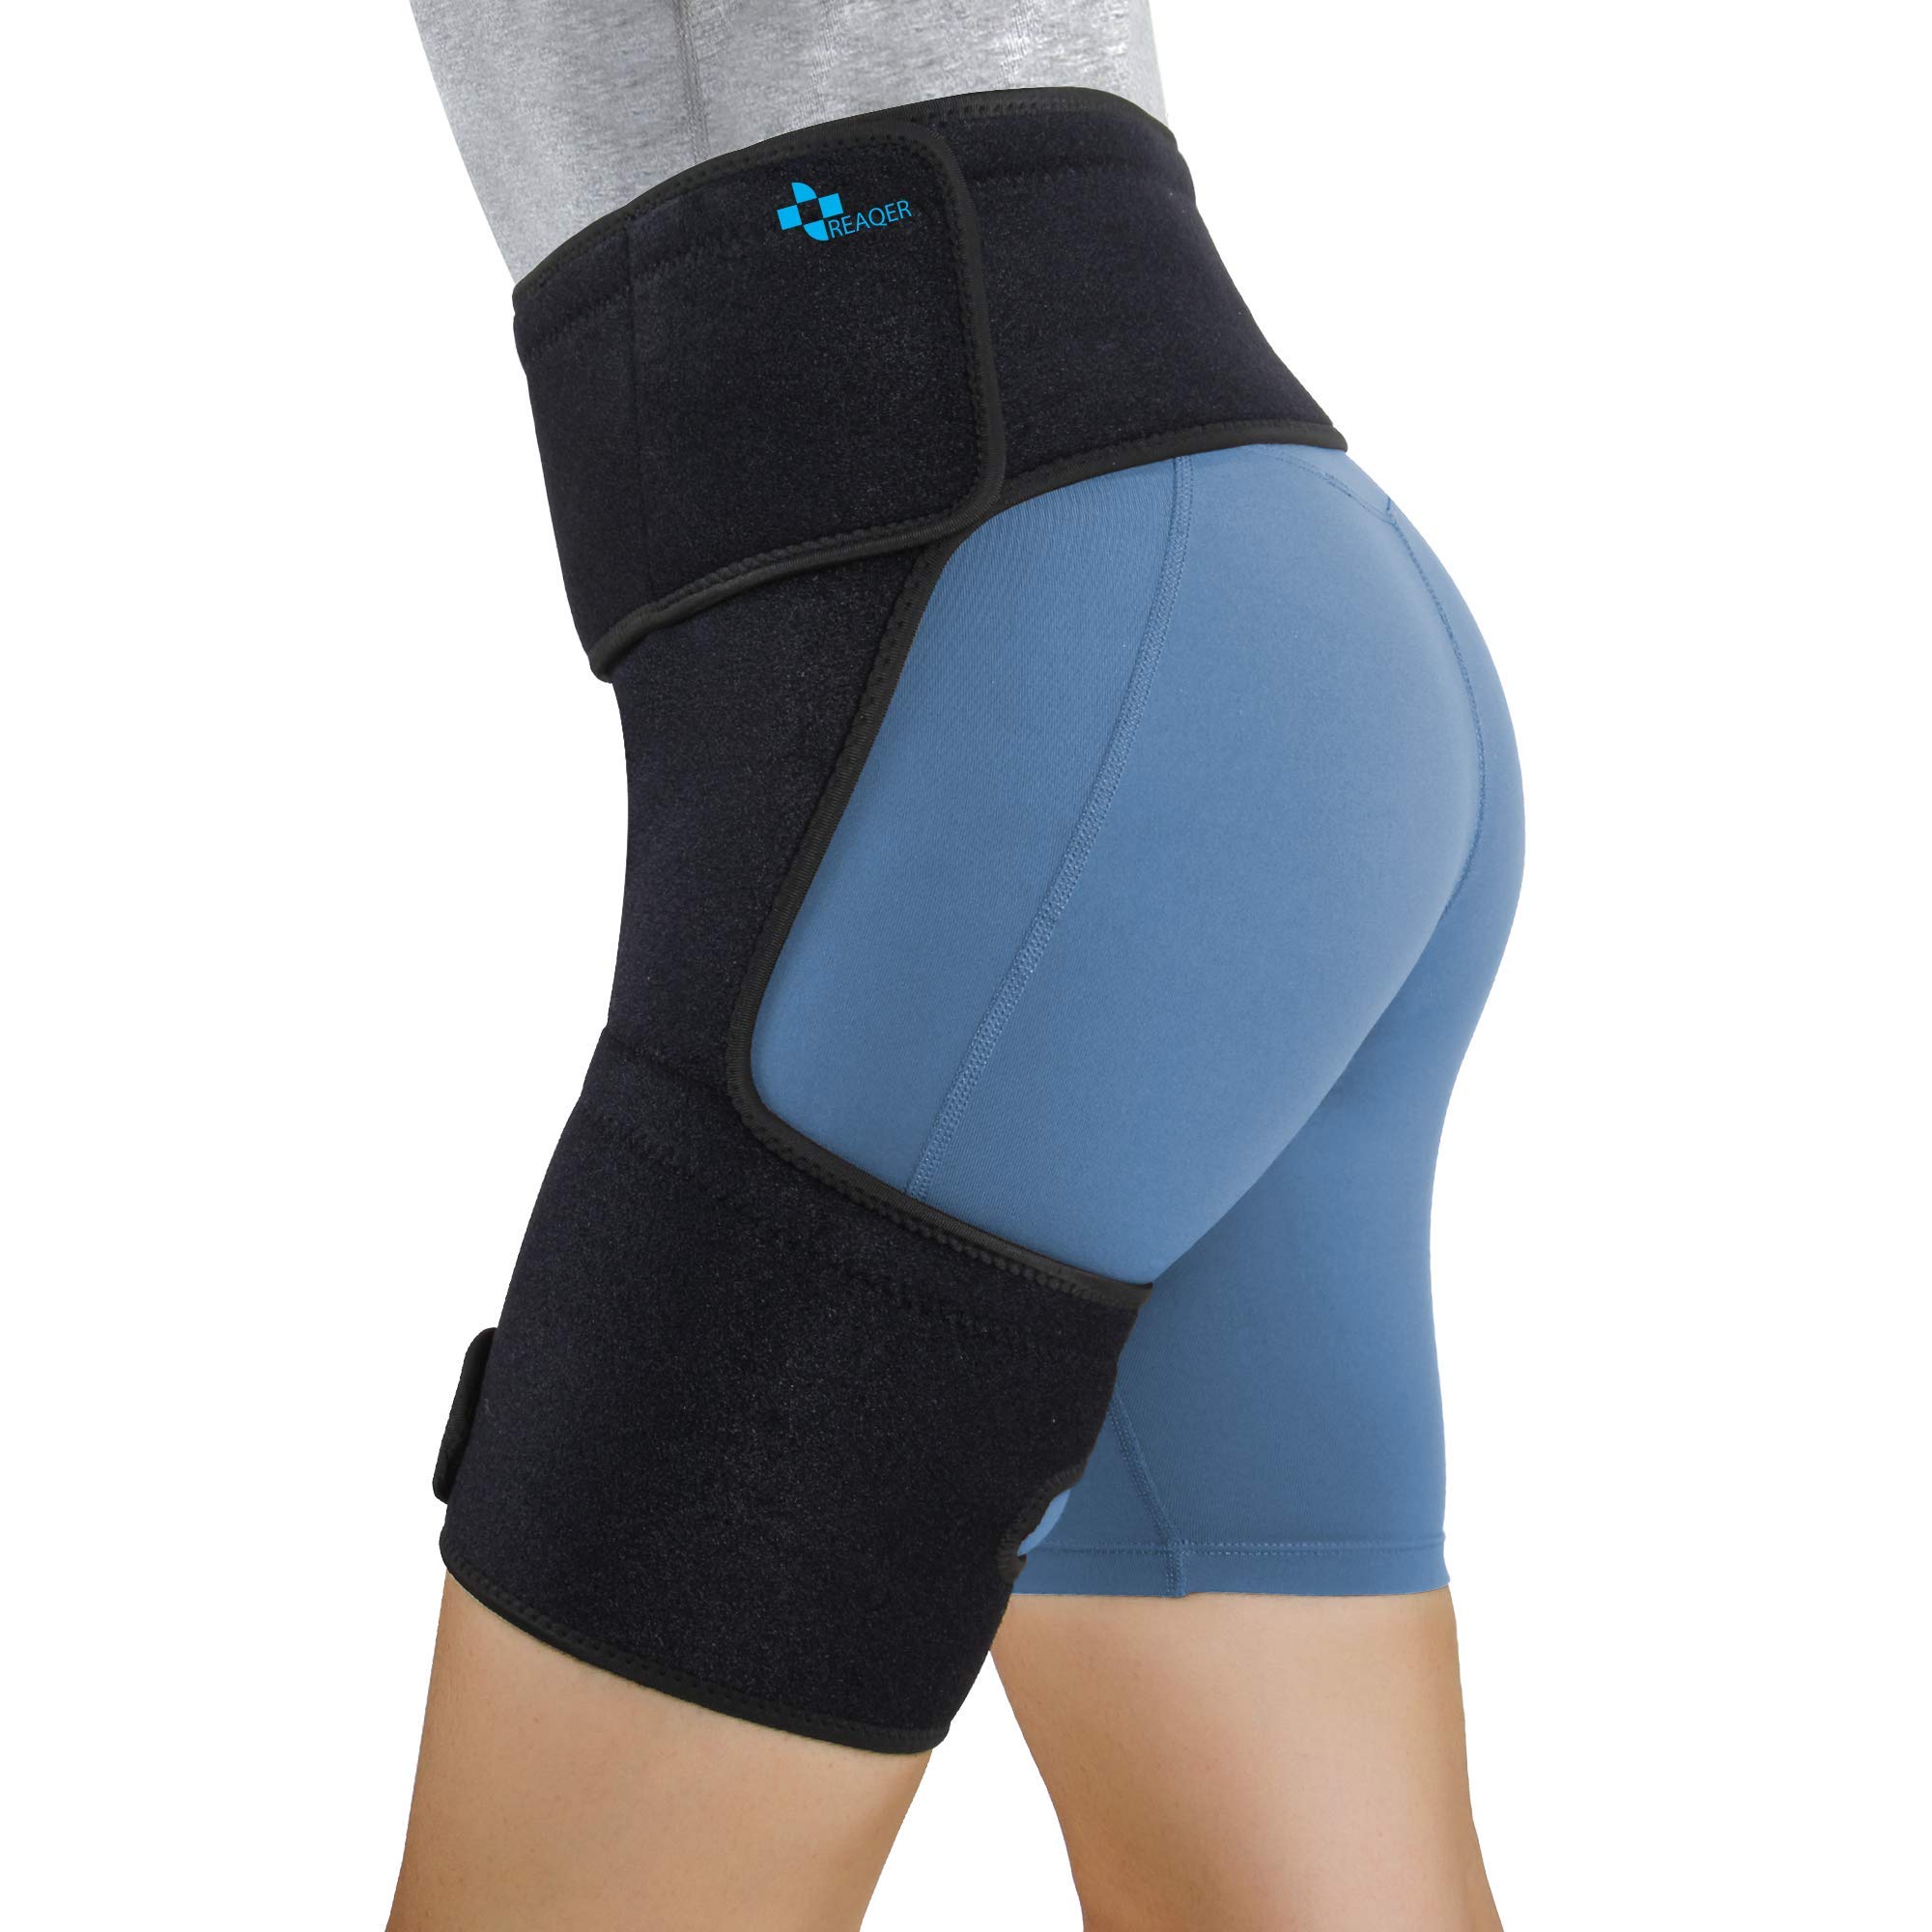 Thigh Wraps Support for Women Men